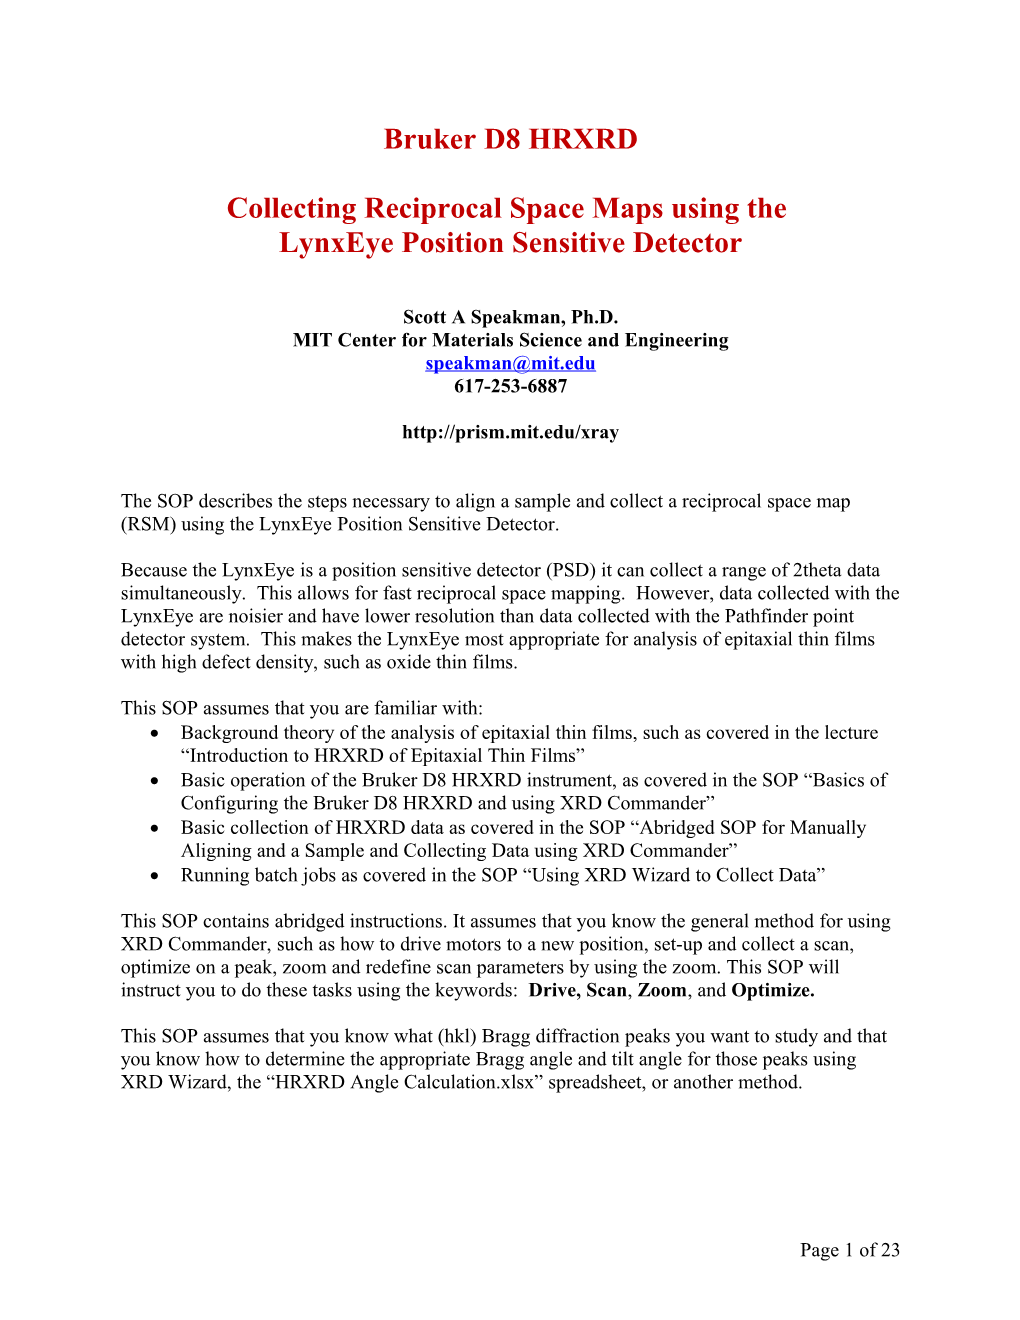 Collecting Reciprocal Space Maps Using The